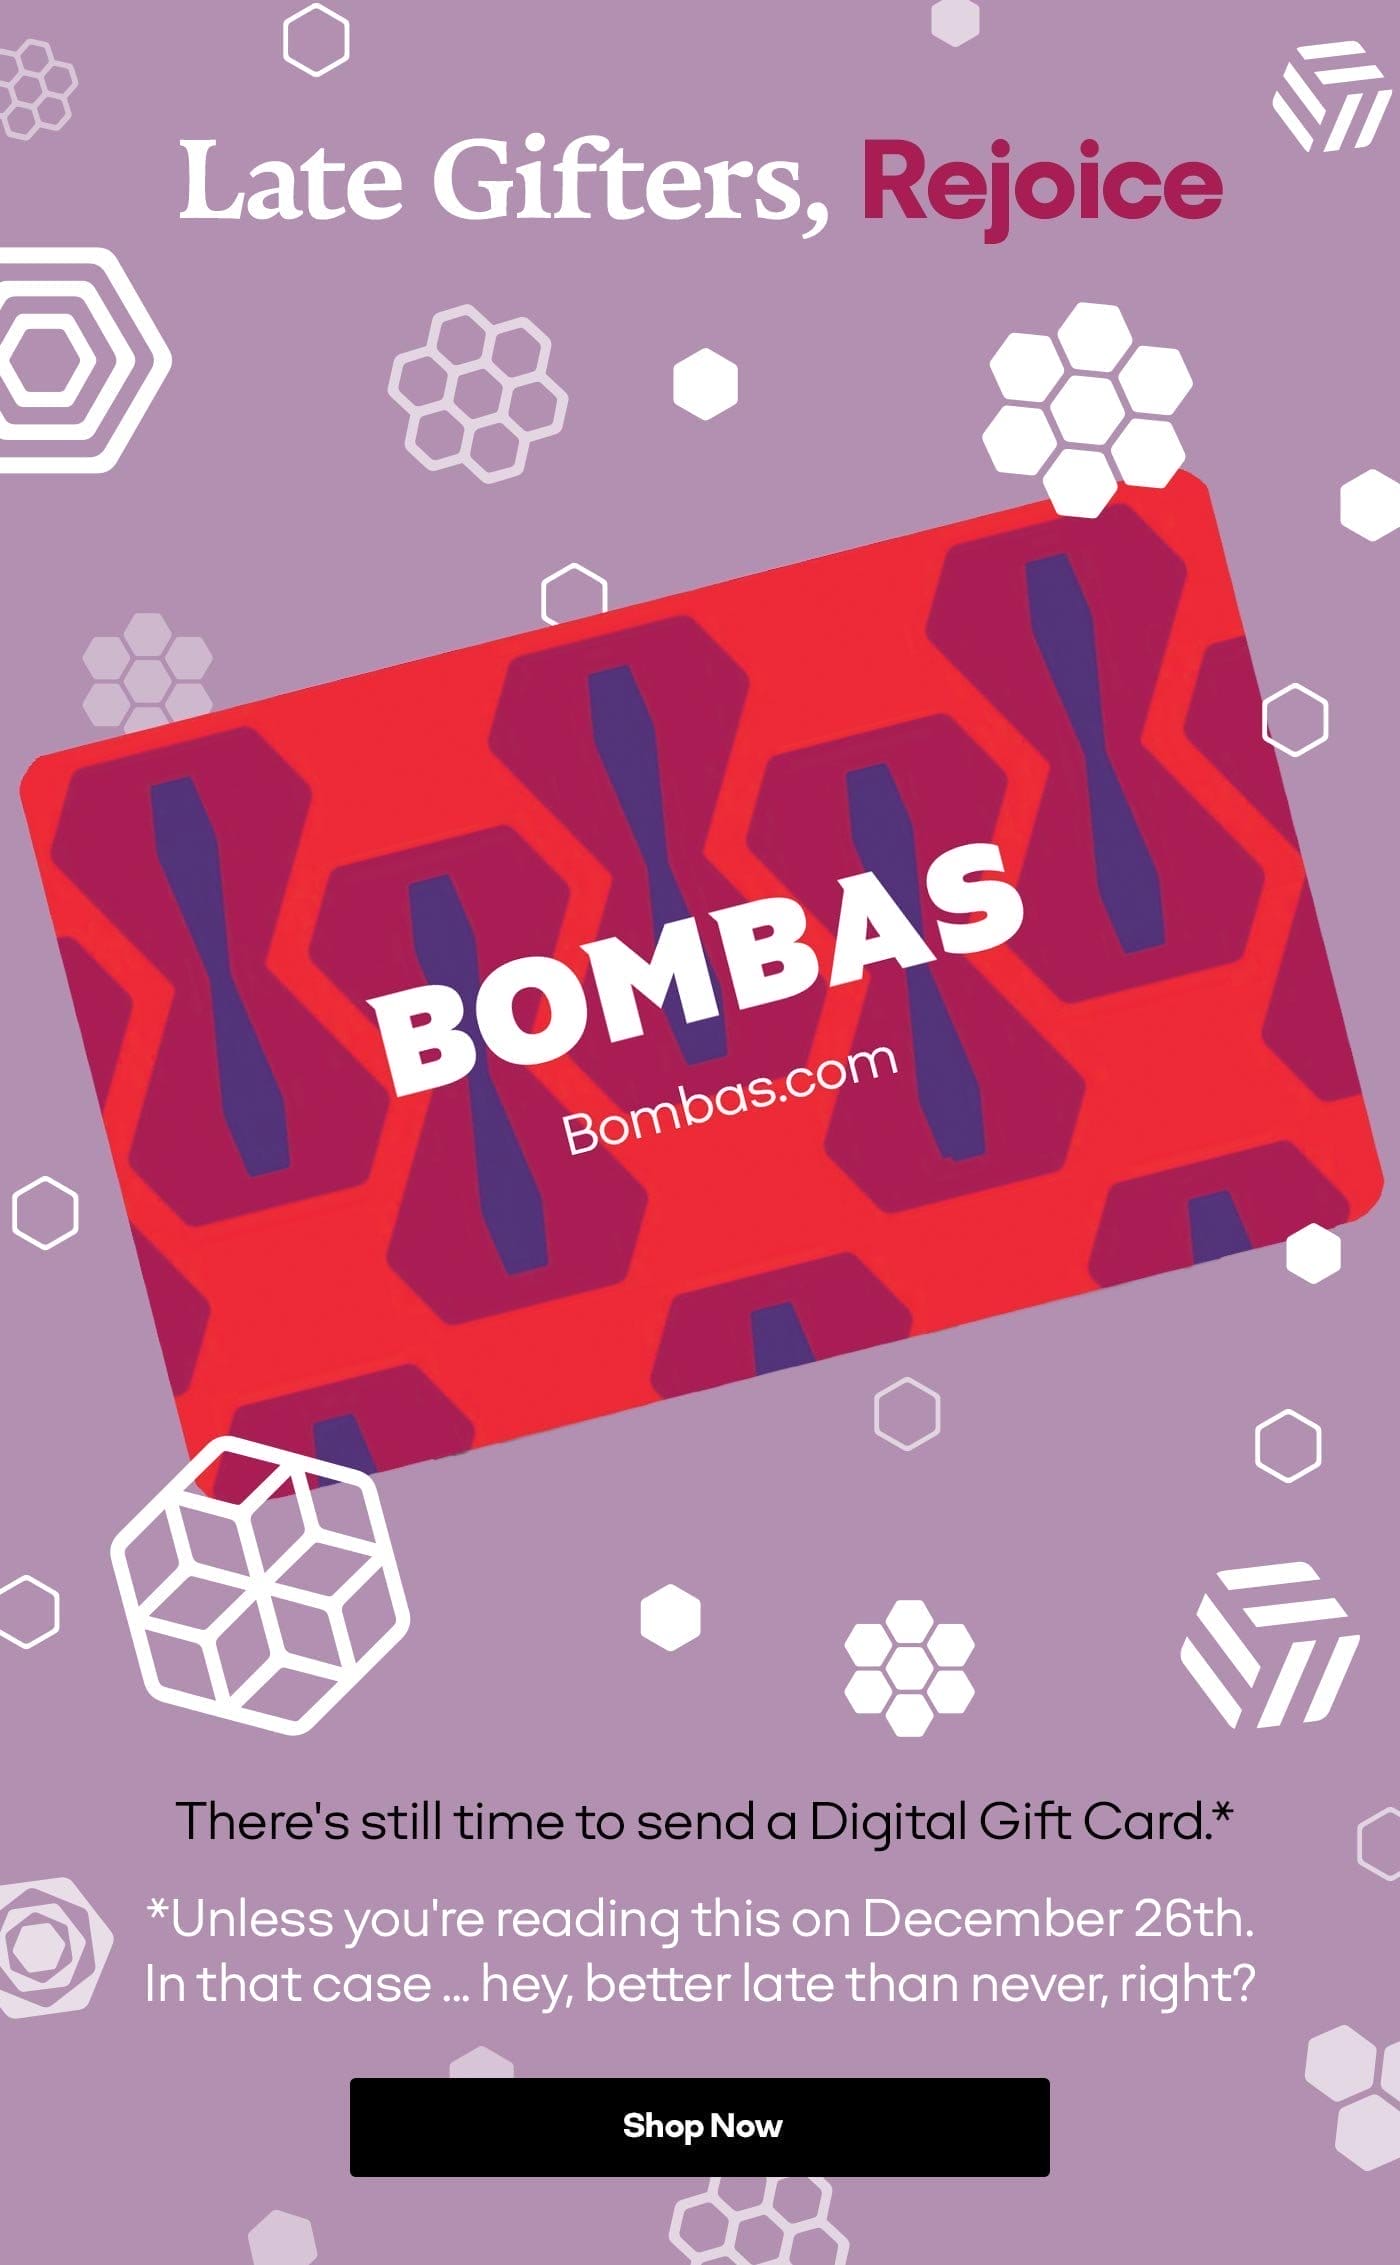 Late Gifters, Rejoice | BOMBAS | Bombas.com | There's still time to send a Digital Gift Card.* *Unless you're reading this on December 26th. In that case ... hey, better late than never, right? Shop Now